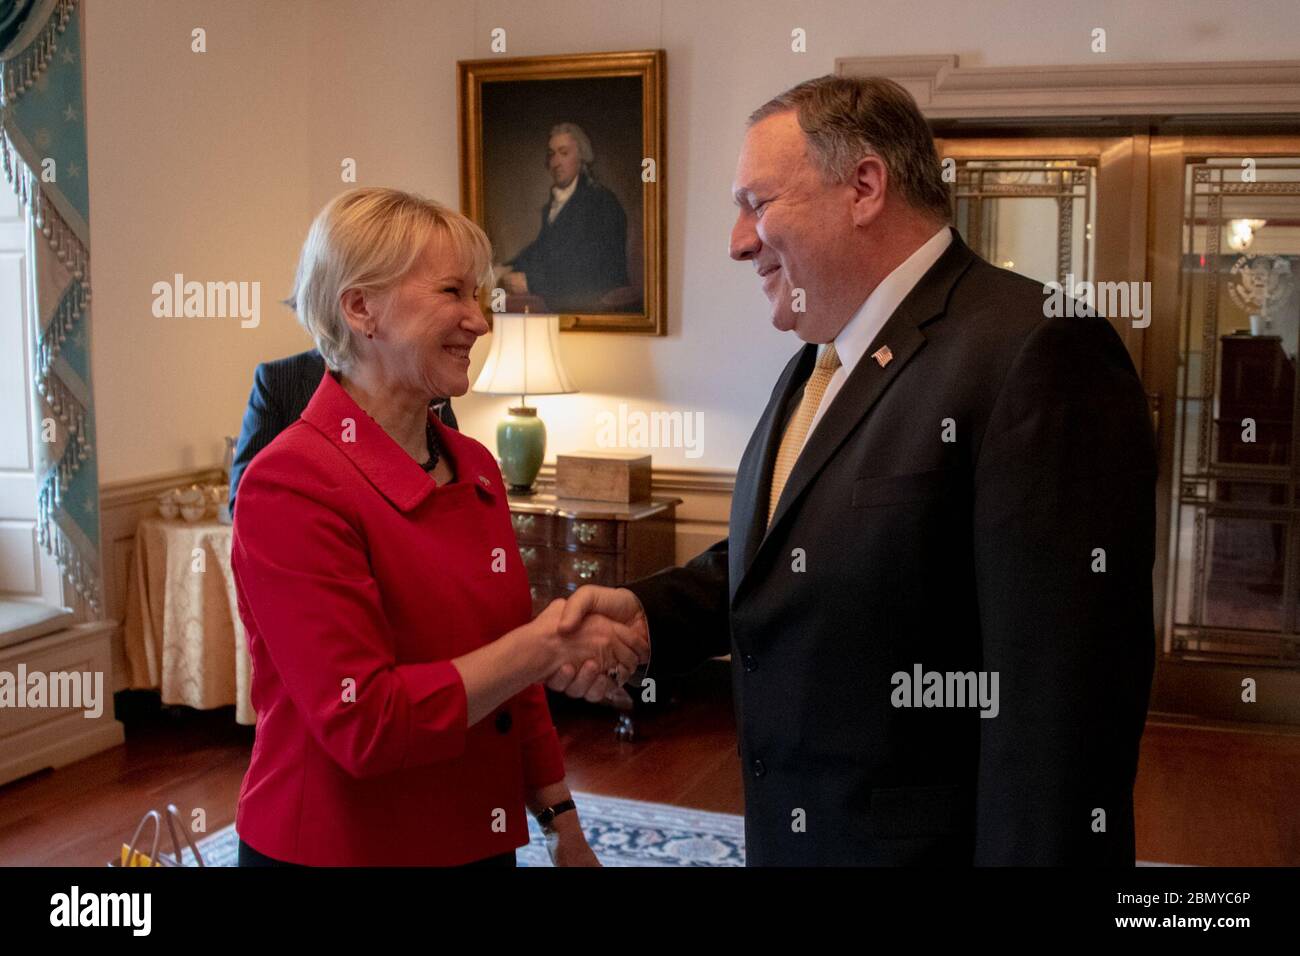 Secretary Pompeo Meets With Swedish Foreign Minister Wallstrom U.S. Secretary of State Michael R. Pompeo meets with Swedish Foreign Minister Margot Wallstrom at the U.S. Department of State in Washington, D.C., on April 29, 2019. Stock Photo